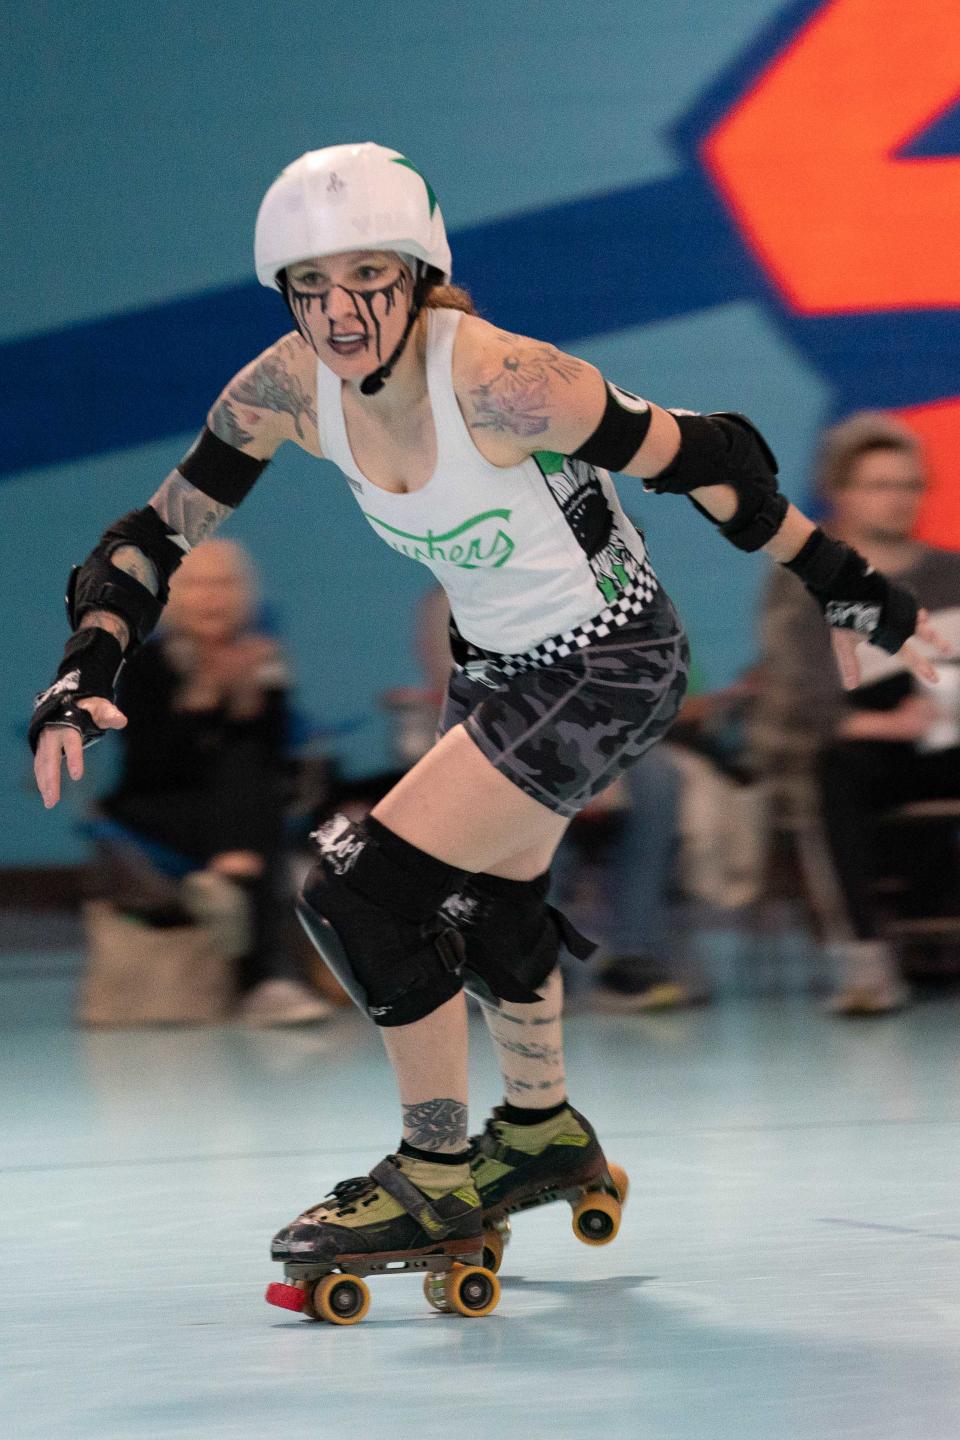 Capital City Crushers Charissa Totten, or Goose Ya, breaks free as a jammer during Saturday's bout against the Salina Sirens.